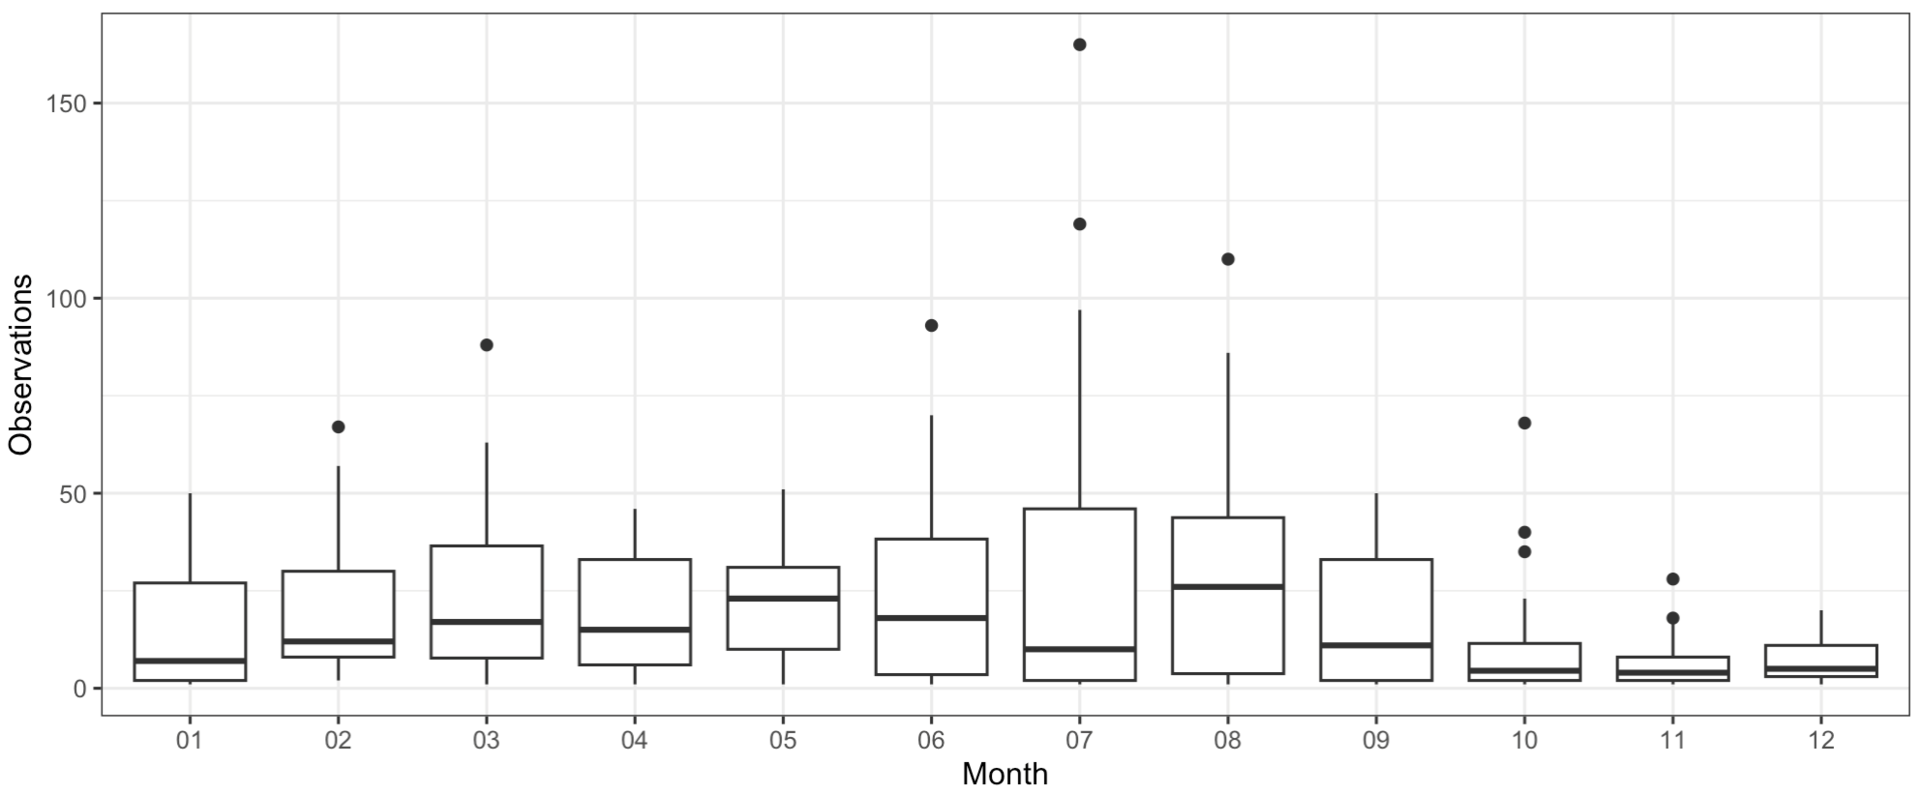 Graph of observation per month